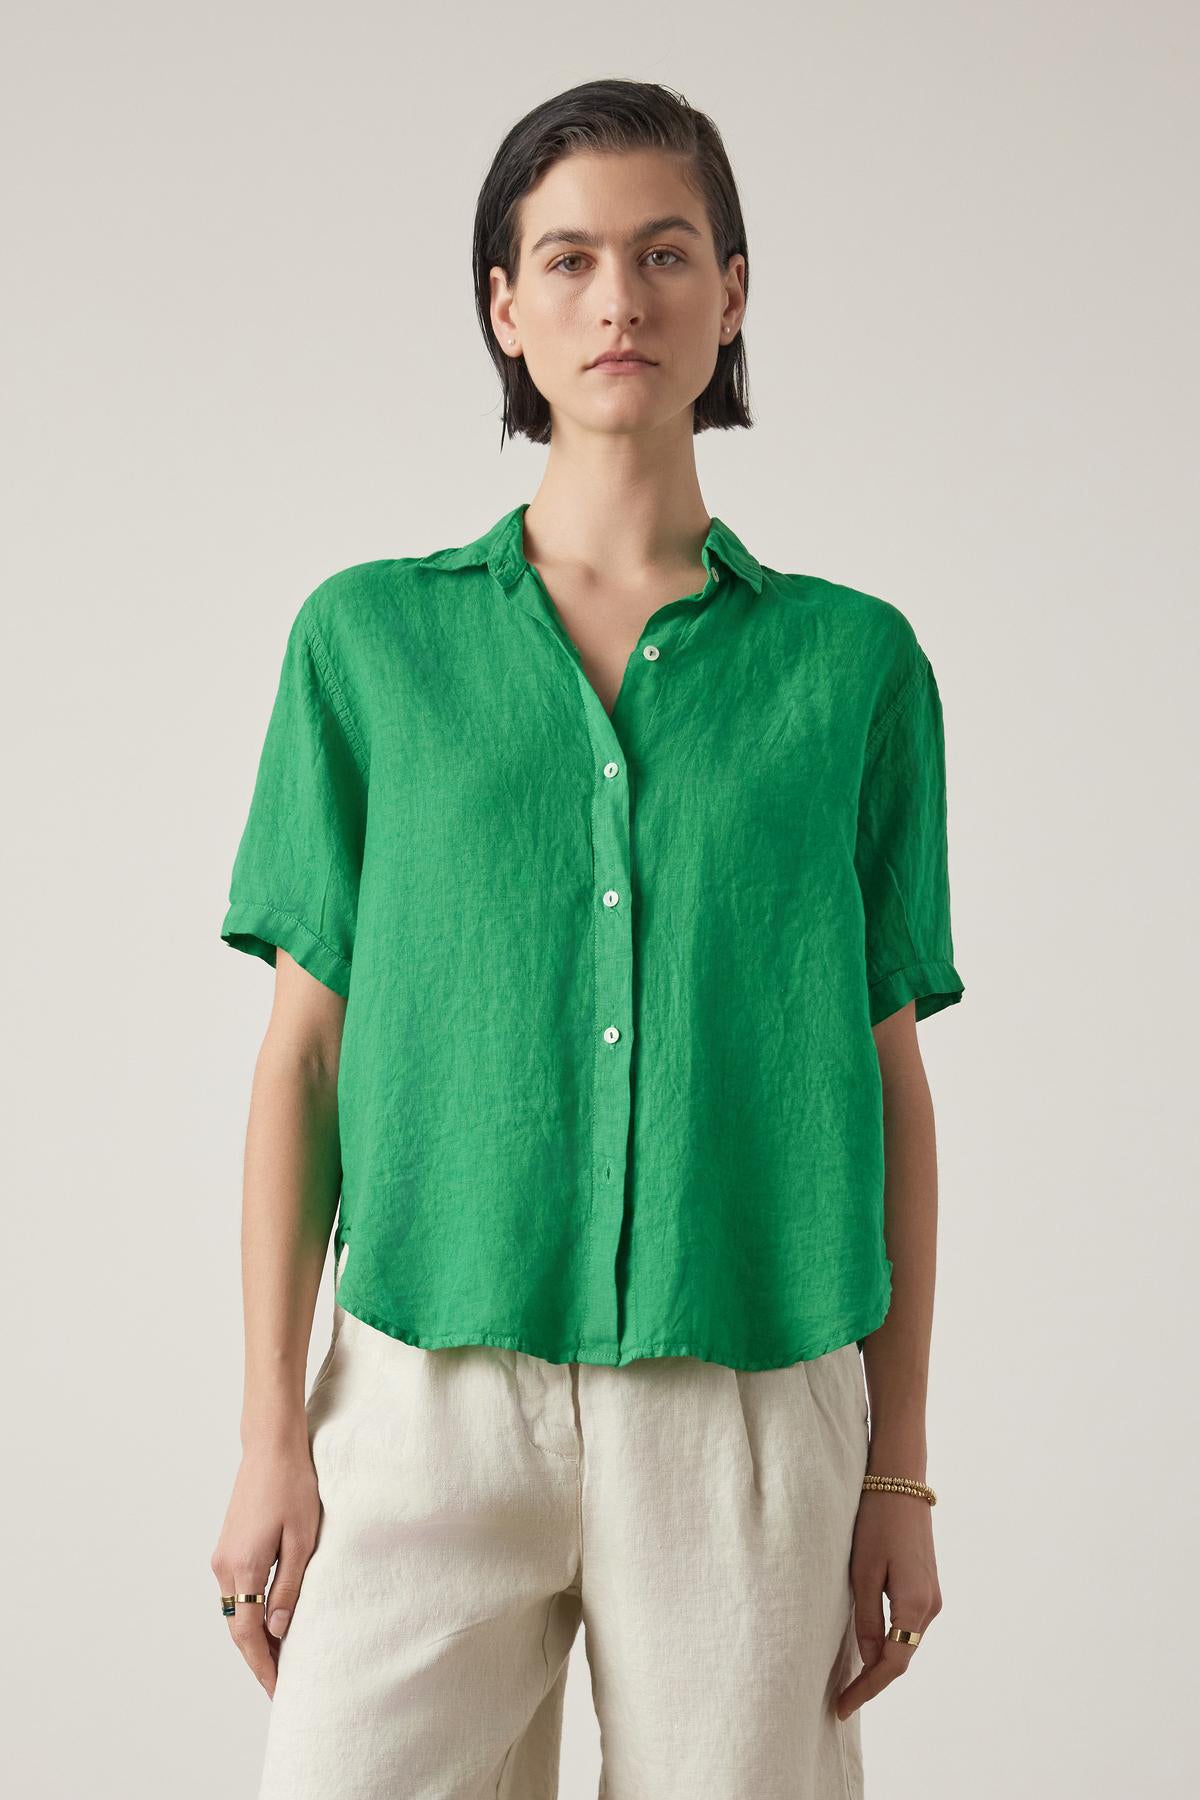 A person with short hair wearing a Velvet by Jenny Graham CLAREMONT LINEN SHIRT in bright green, and cream pants, standing against a light background.-36753623449793